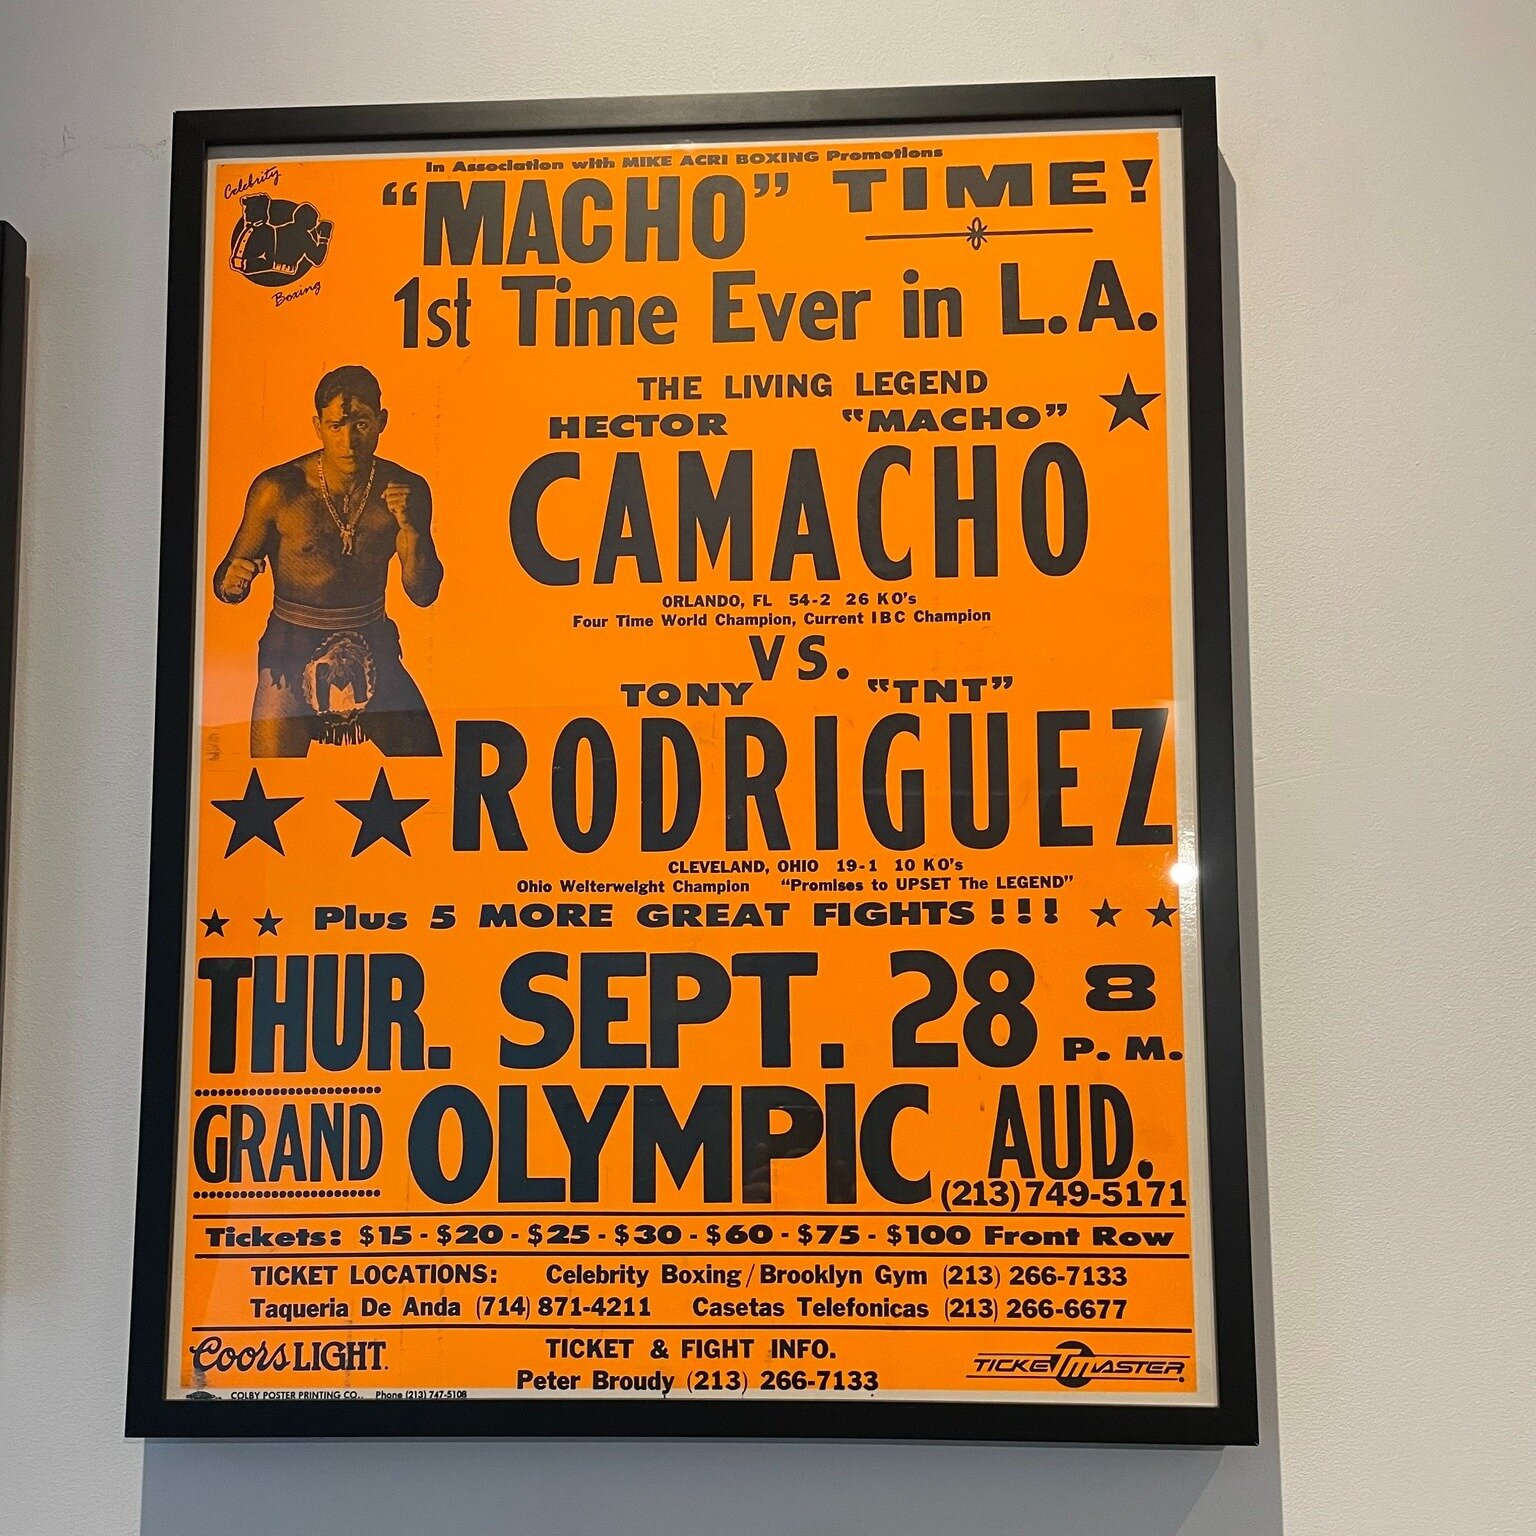 Important exhibition note: April 14th (the day of our Boxing Expo) will be the last day the second floor of the show will be open. That means if you want to see the wrestling gear of Mando Guerrero,  photographs by Merrick Morton and Alison Braun, ra